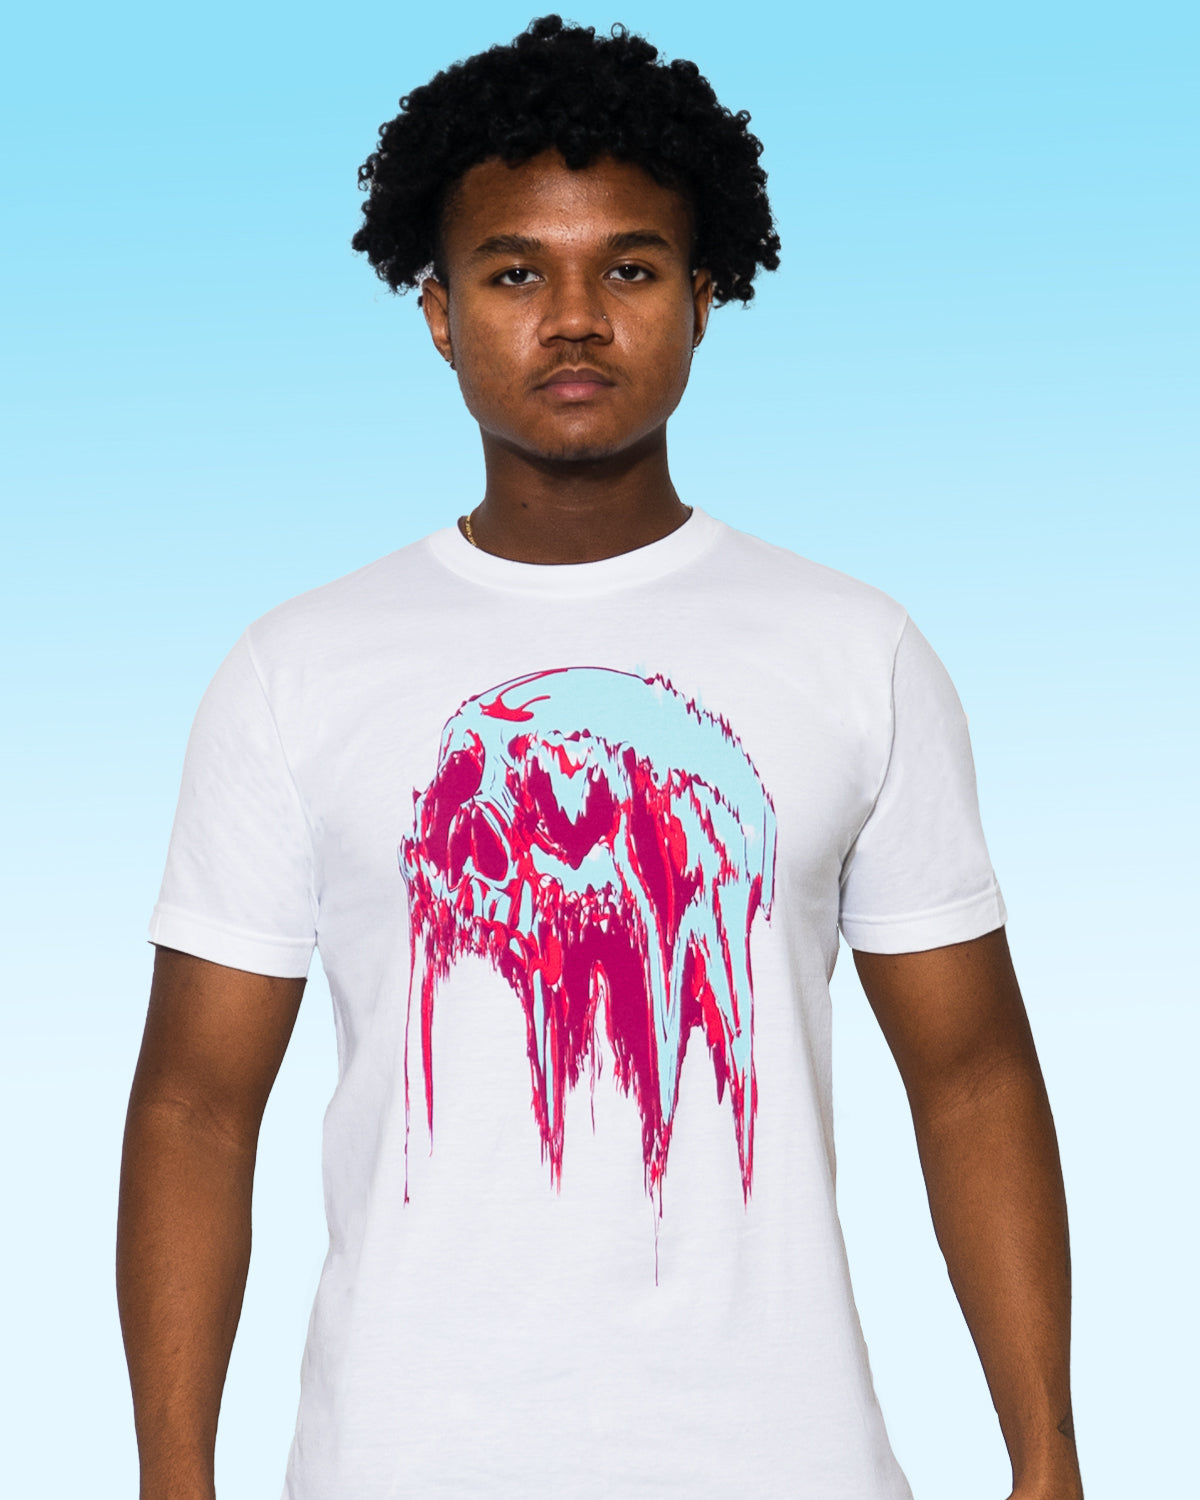 States Of Decay Tee